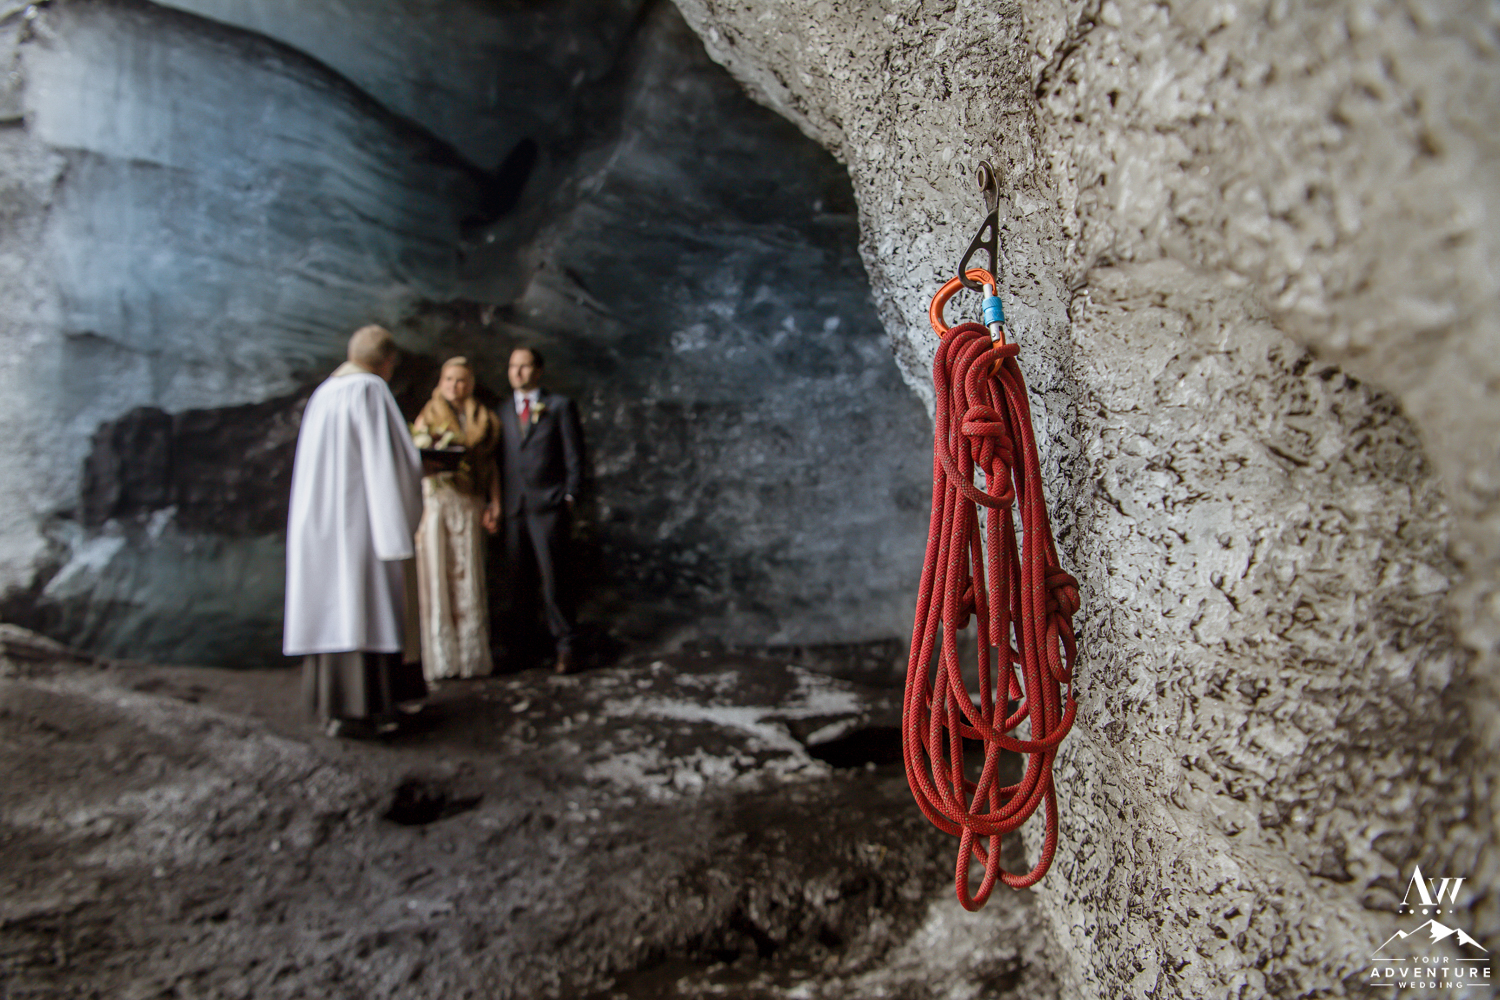 Climbing Rope during an Ice cave elopement in Iceland